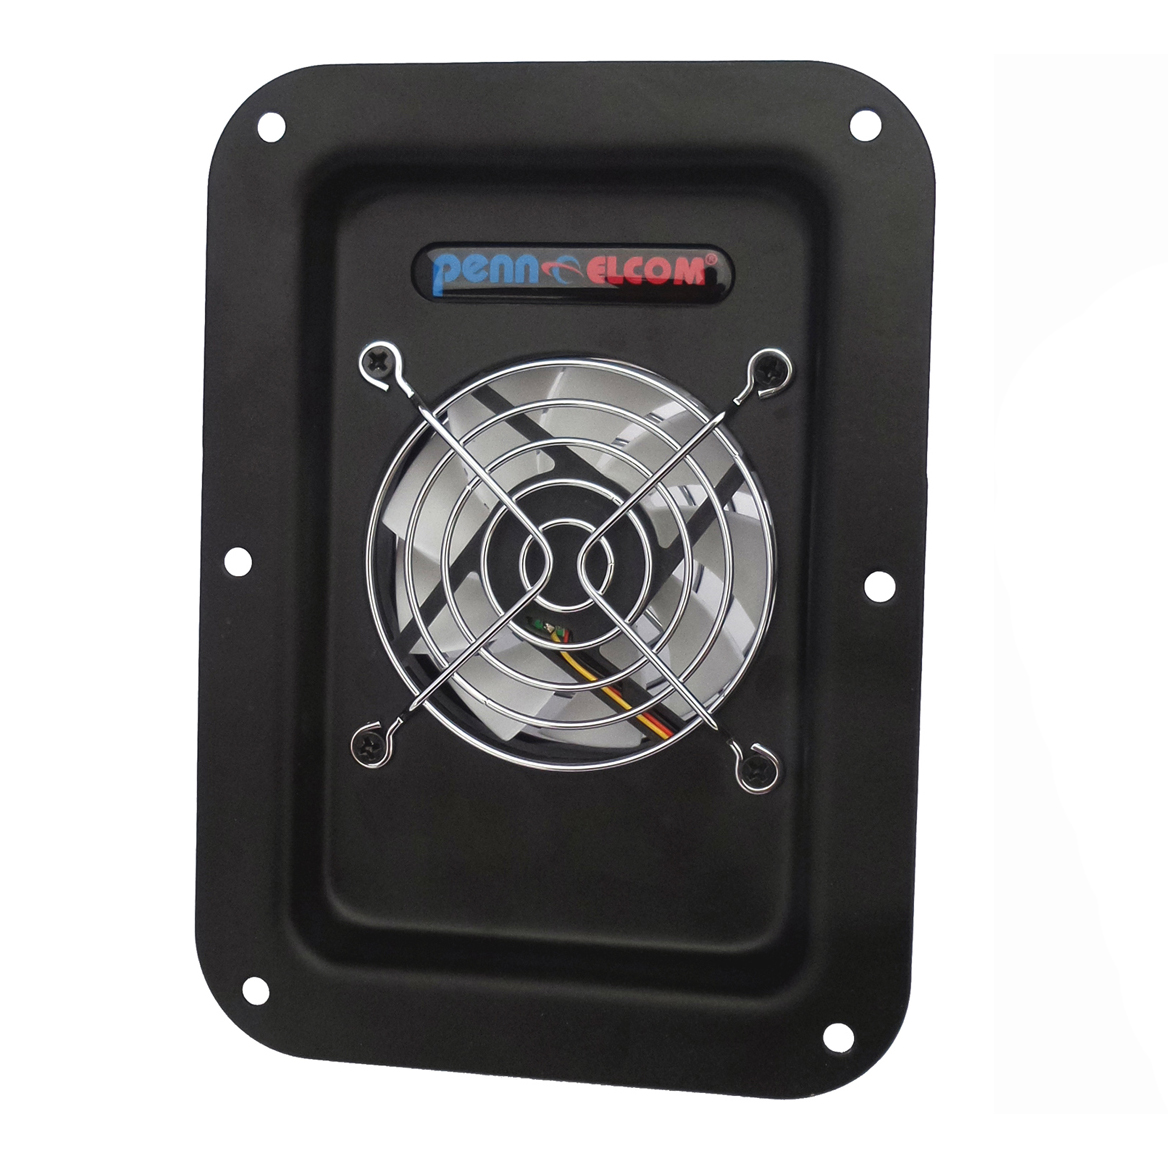 Have your flight case stay cool with our fans and other cooling options